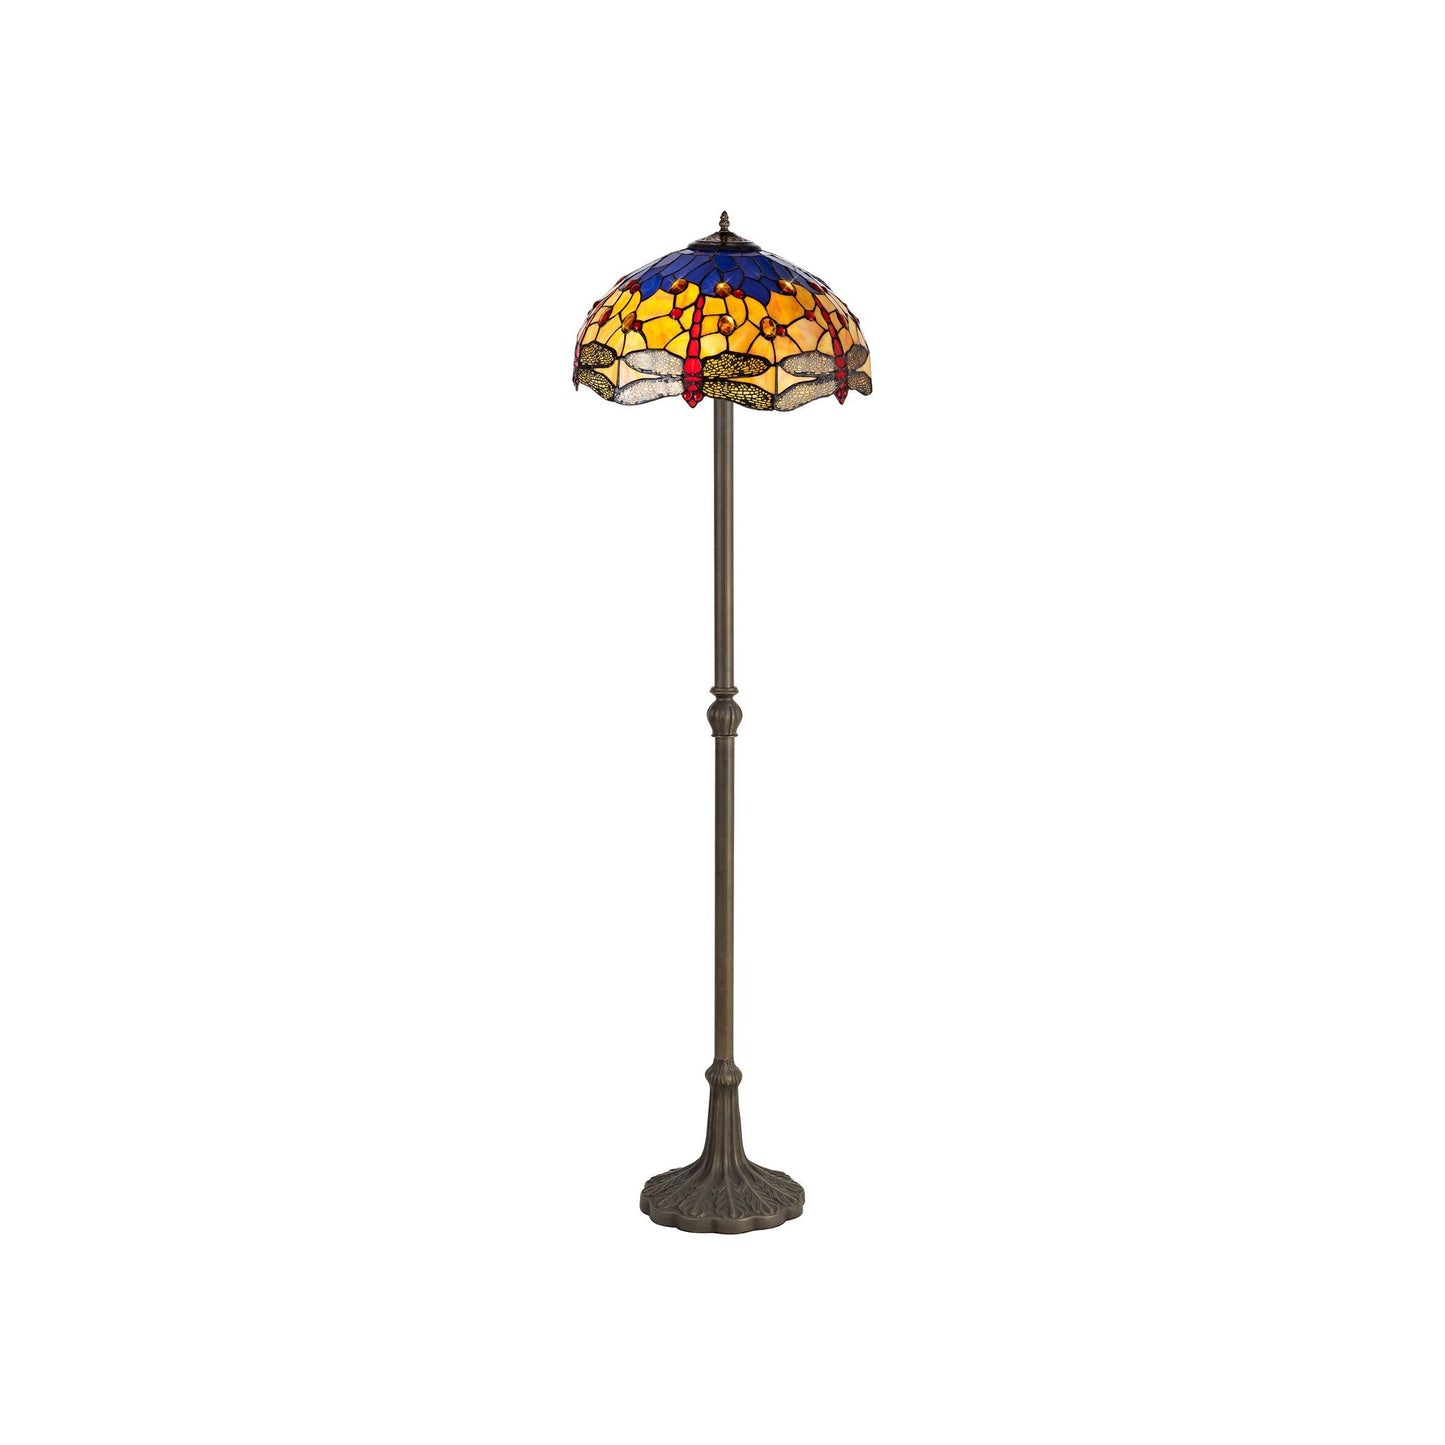 Blue and Yellow Summer Tiffany Floor Lamp - PRE ORDERS ONLY